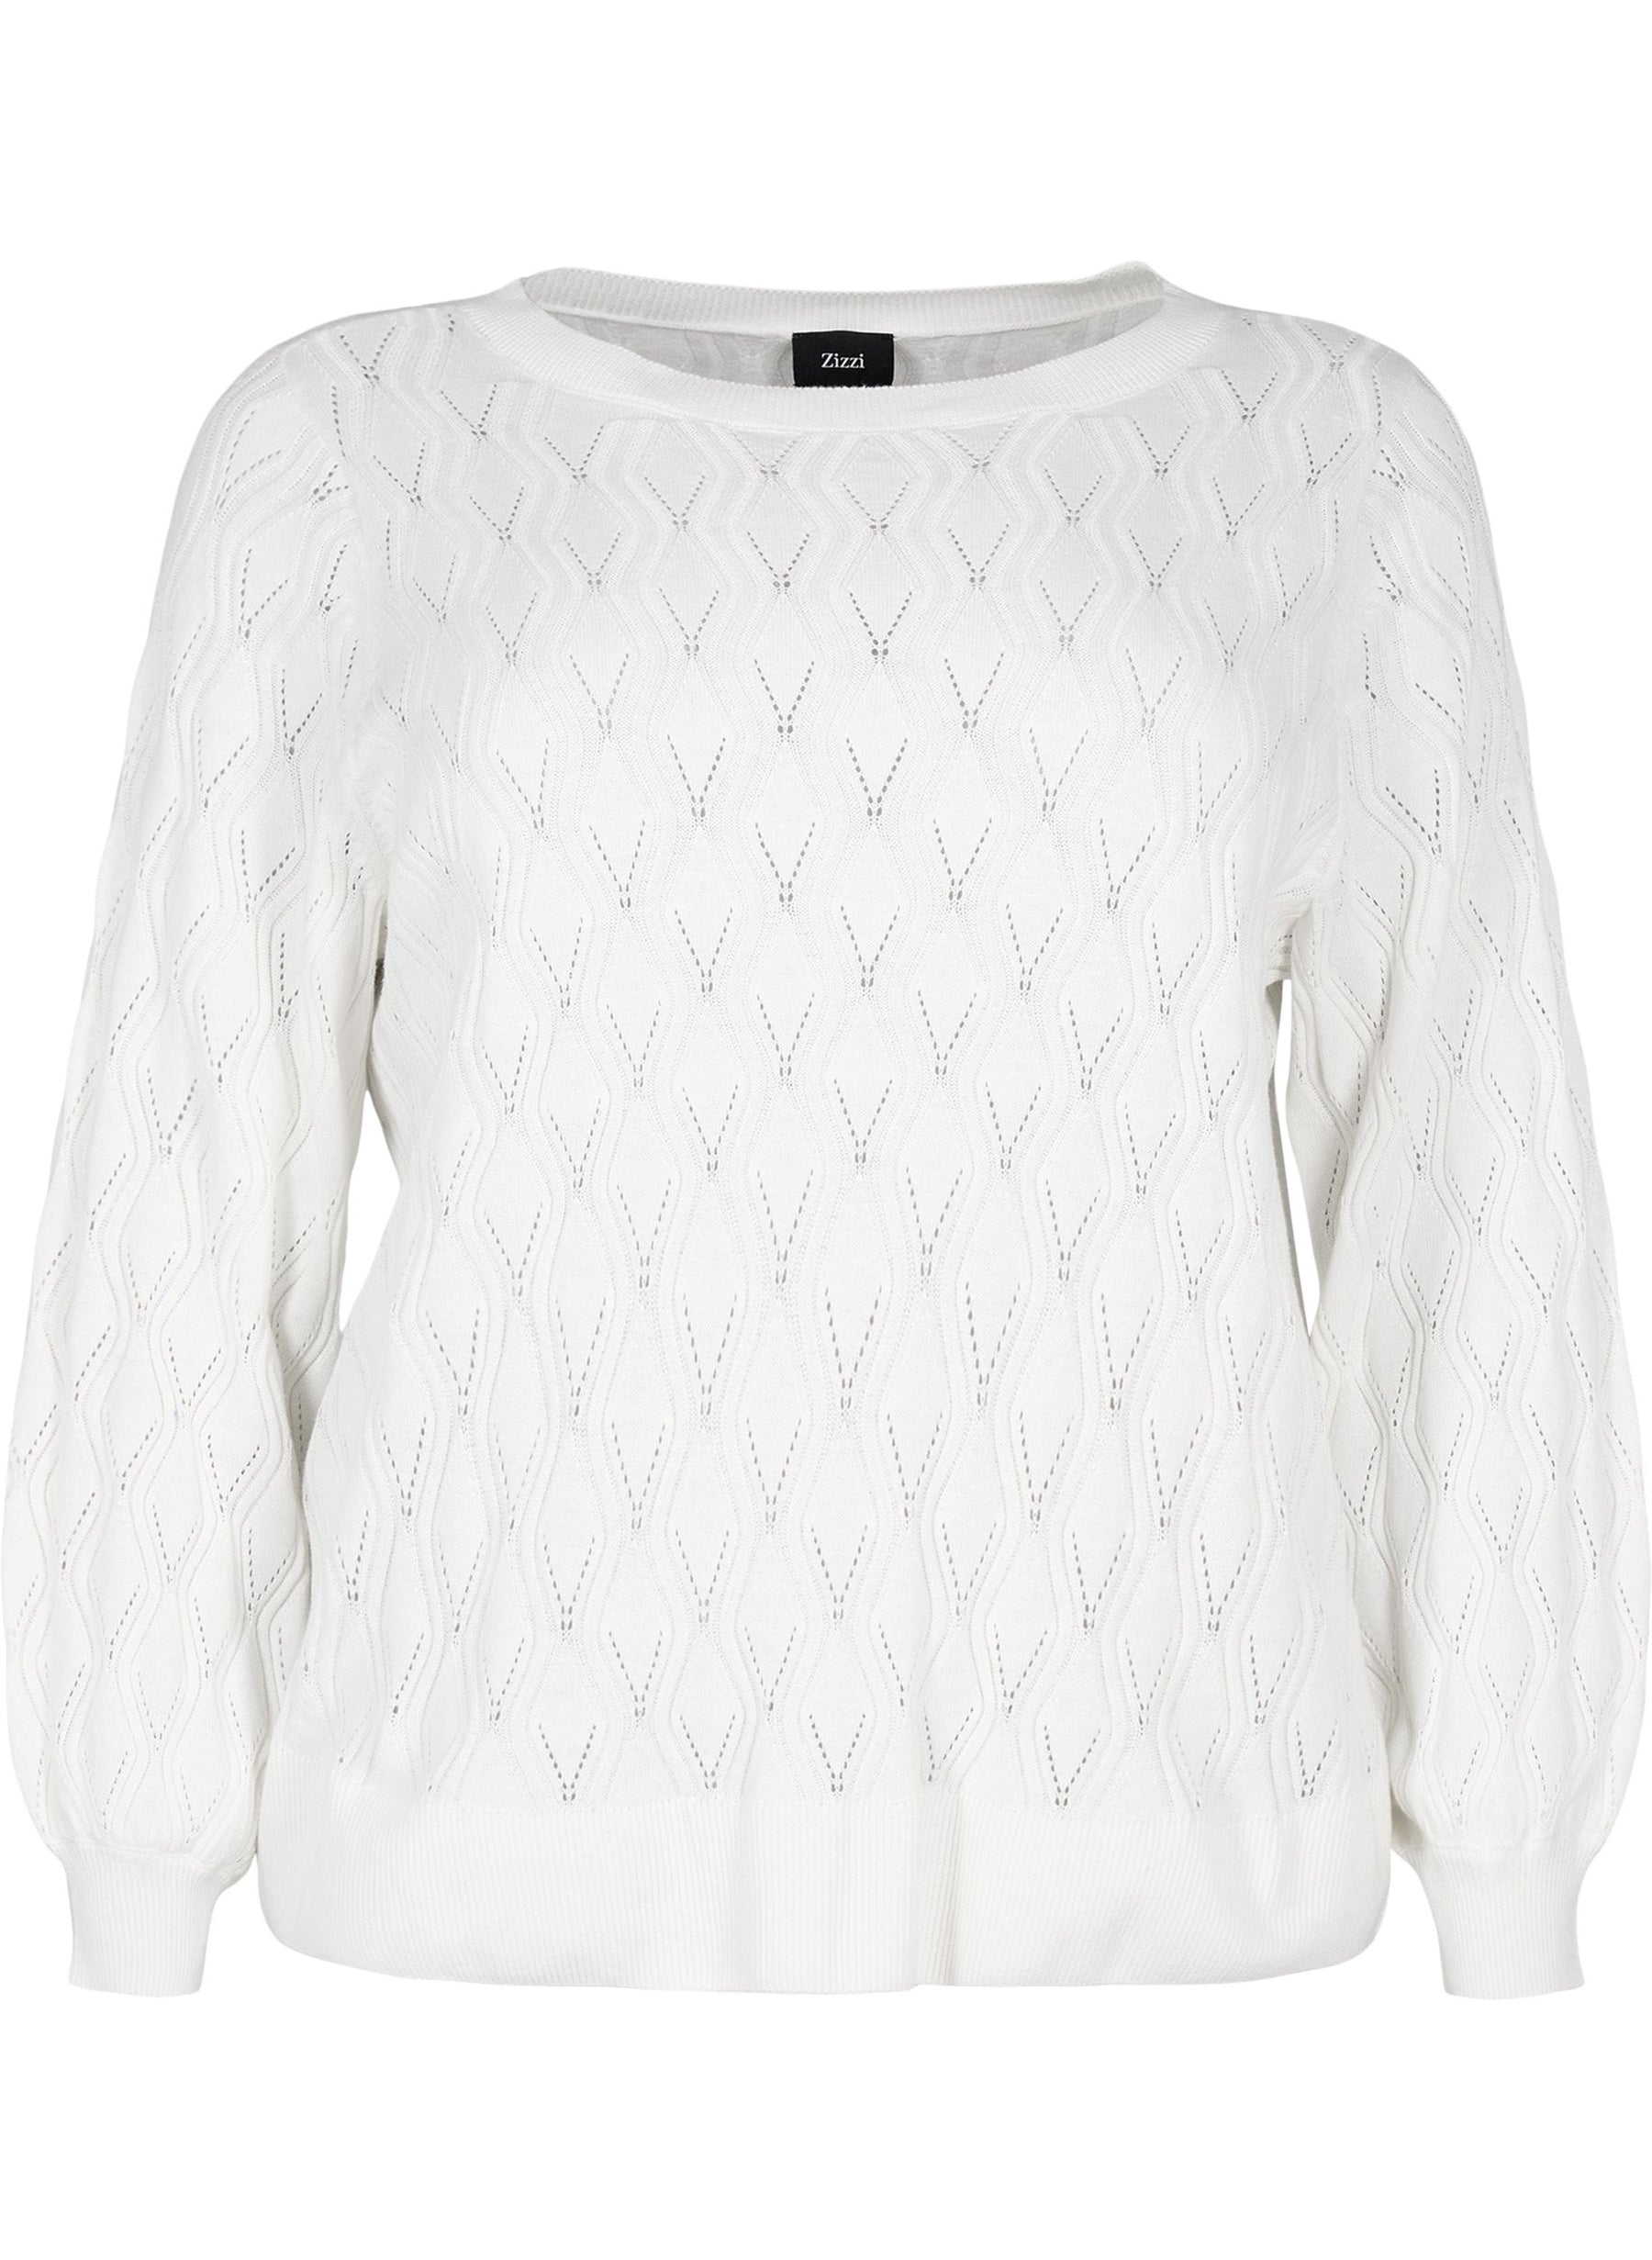 Zizzi Knitted Pullover in Size | Clothing Plus White